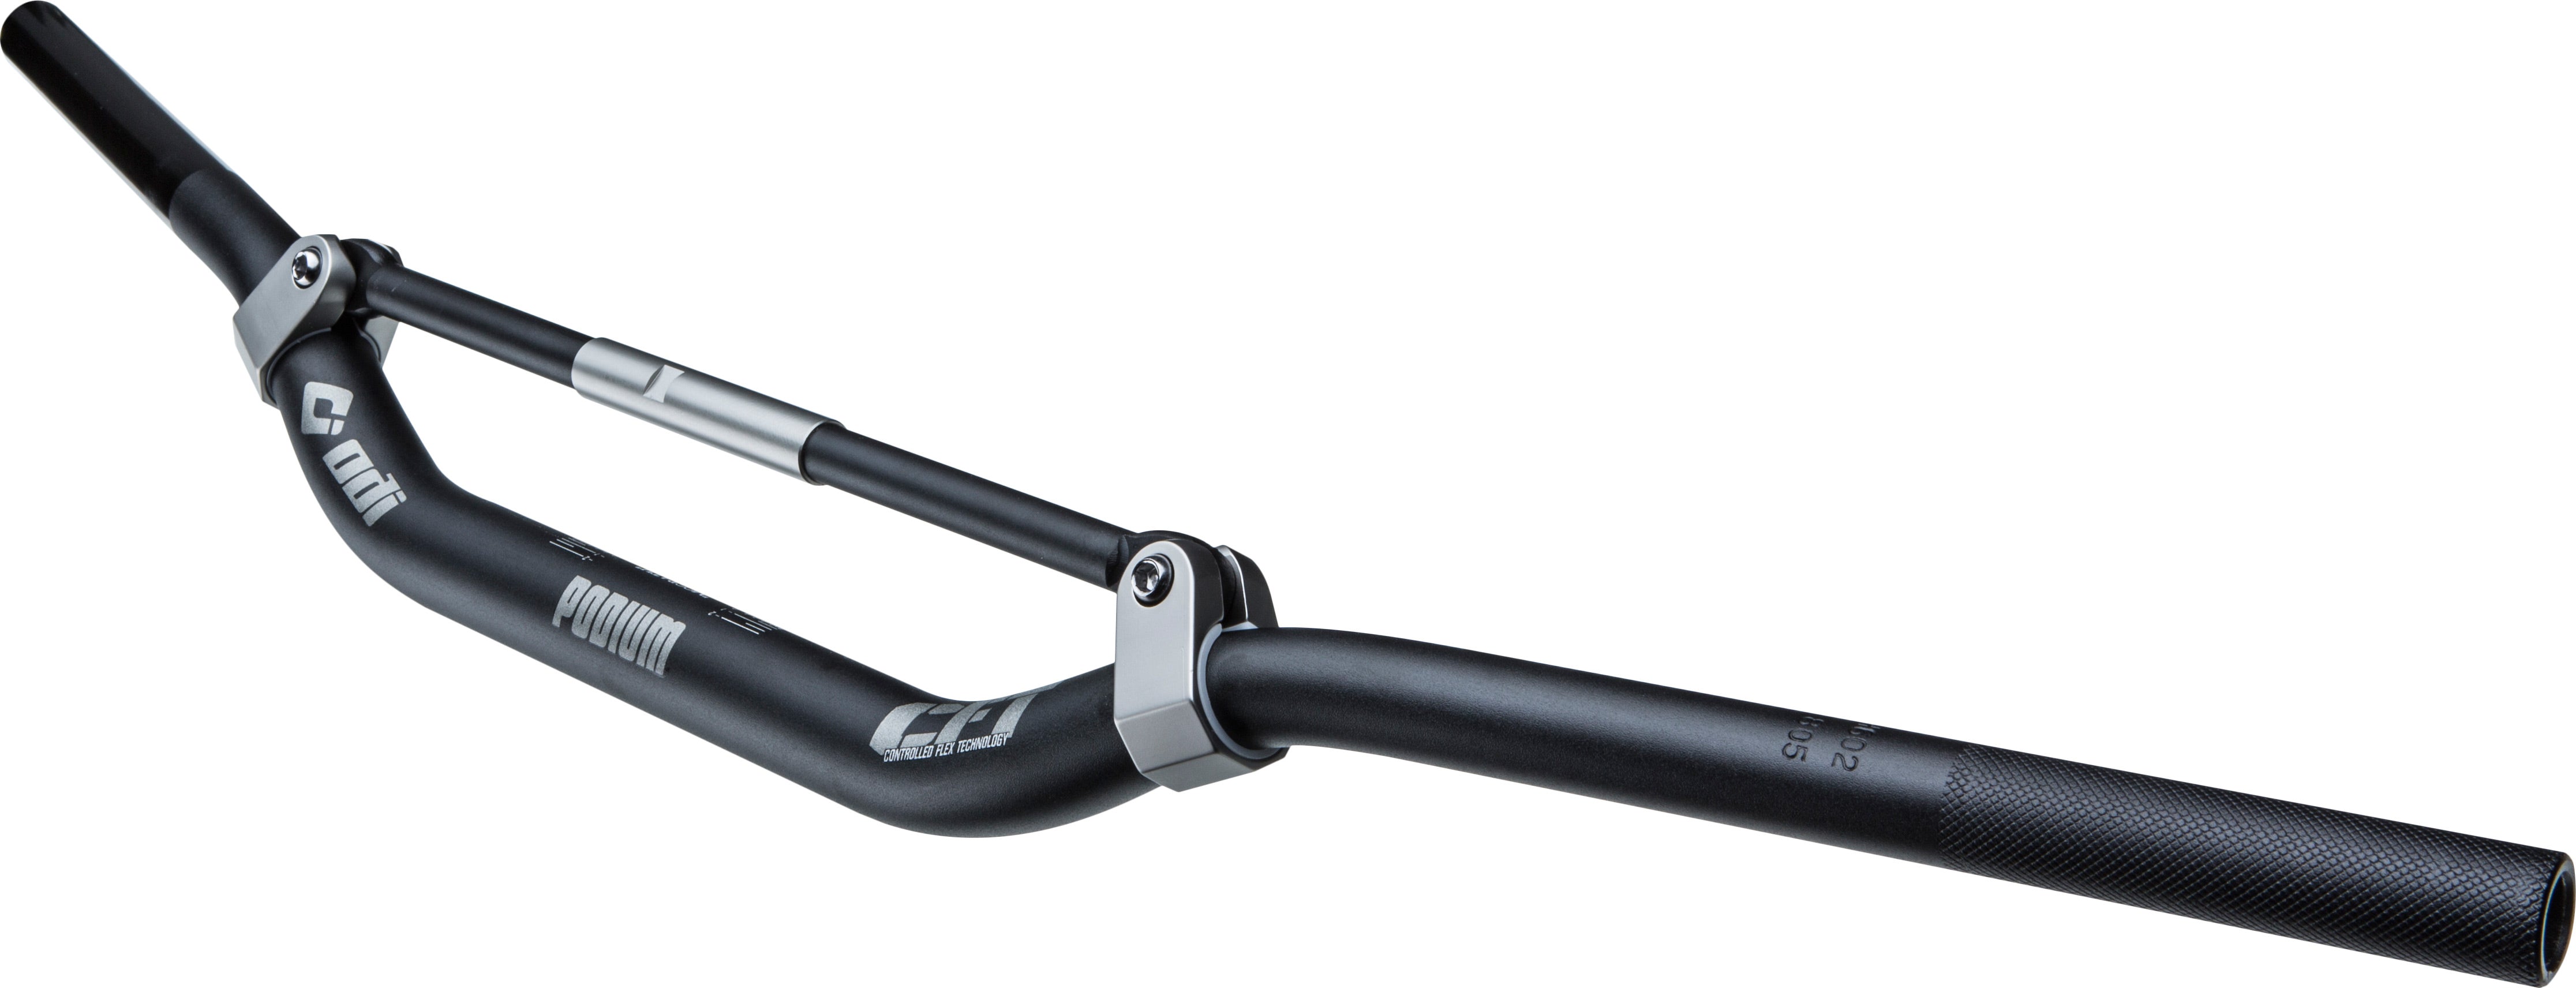 Controlled Flex Technology Handlebar Champ Bend with dimensions 805mm length, 93mm height, 50mm rise, 205mm base, 55mm sweep